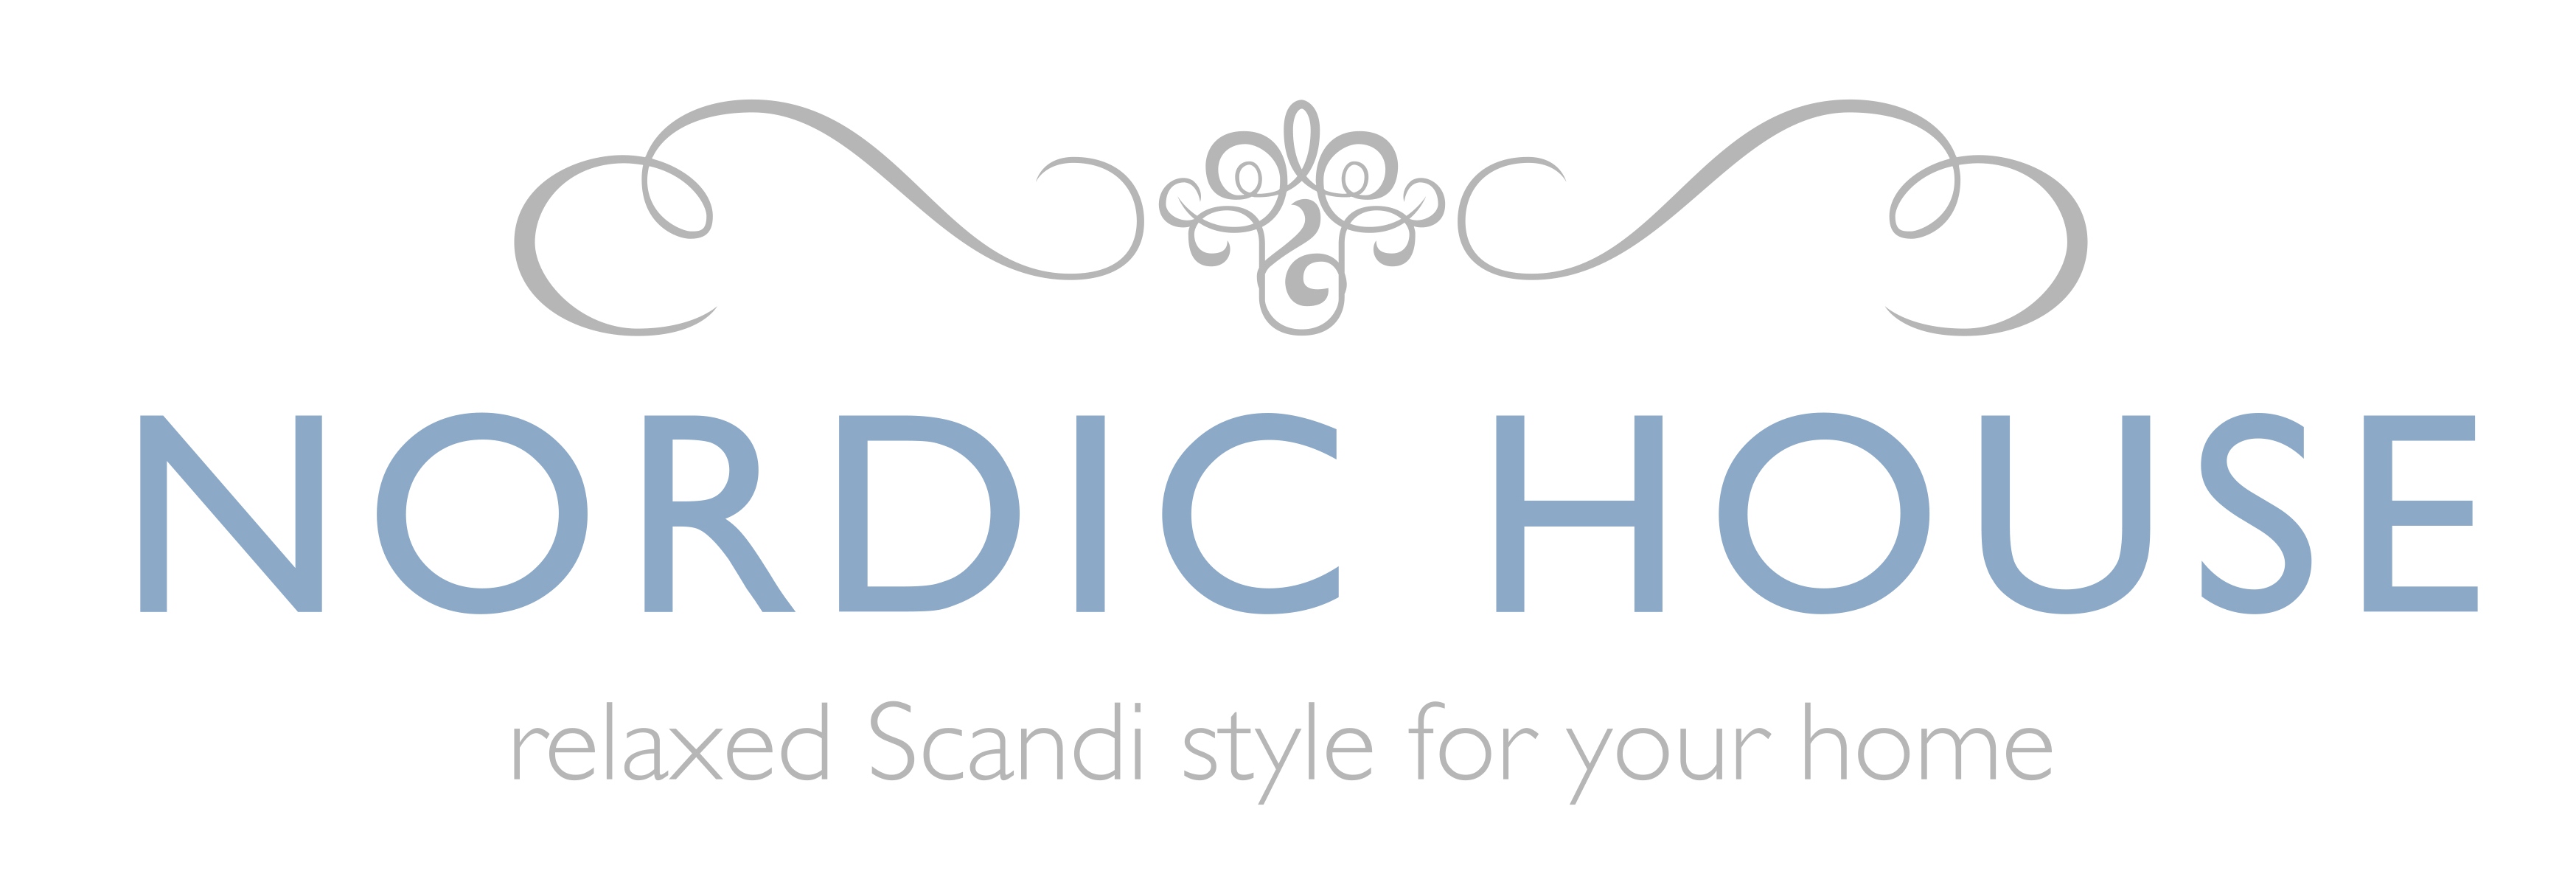 Nordic House logo in grey, light blue and white with a silver swirly pattern.